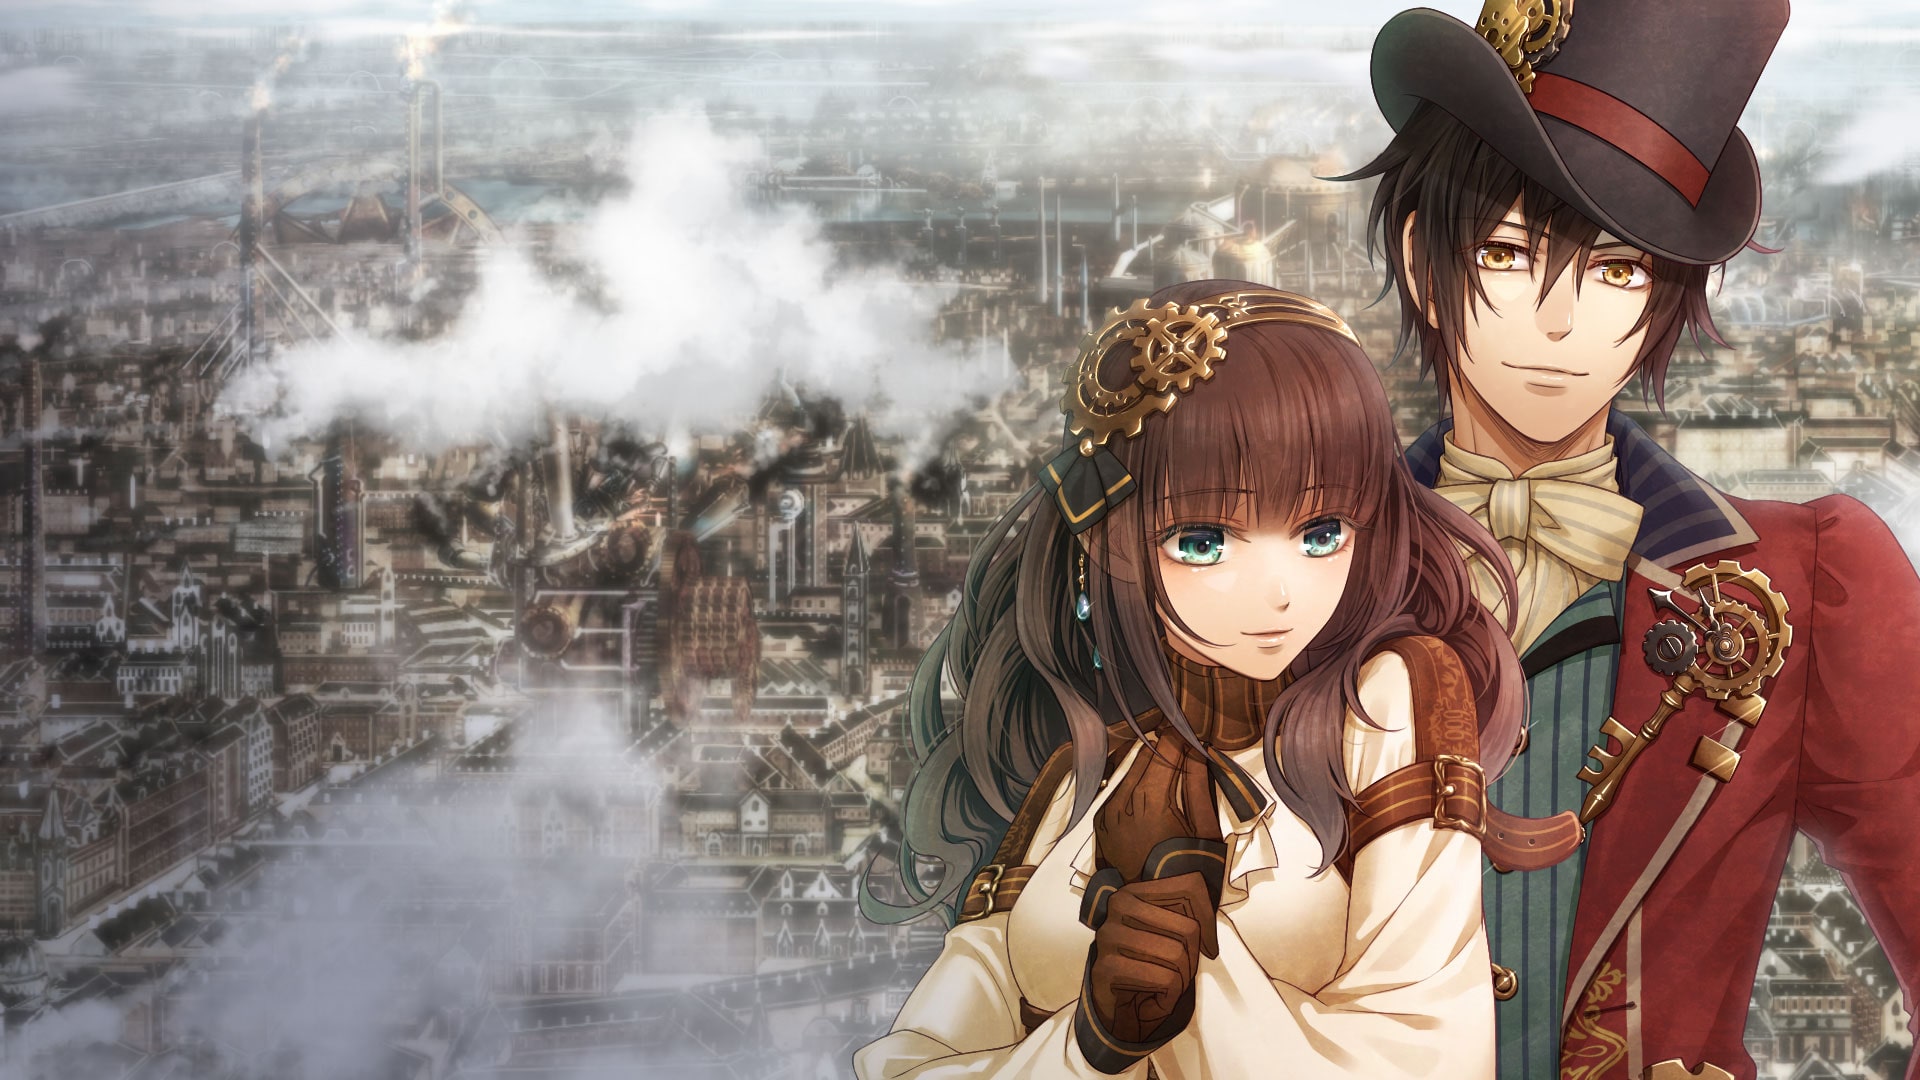 Code: Realize ~Bouquet of Rainbows~